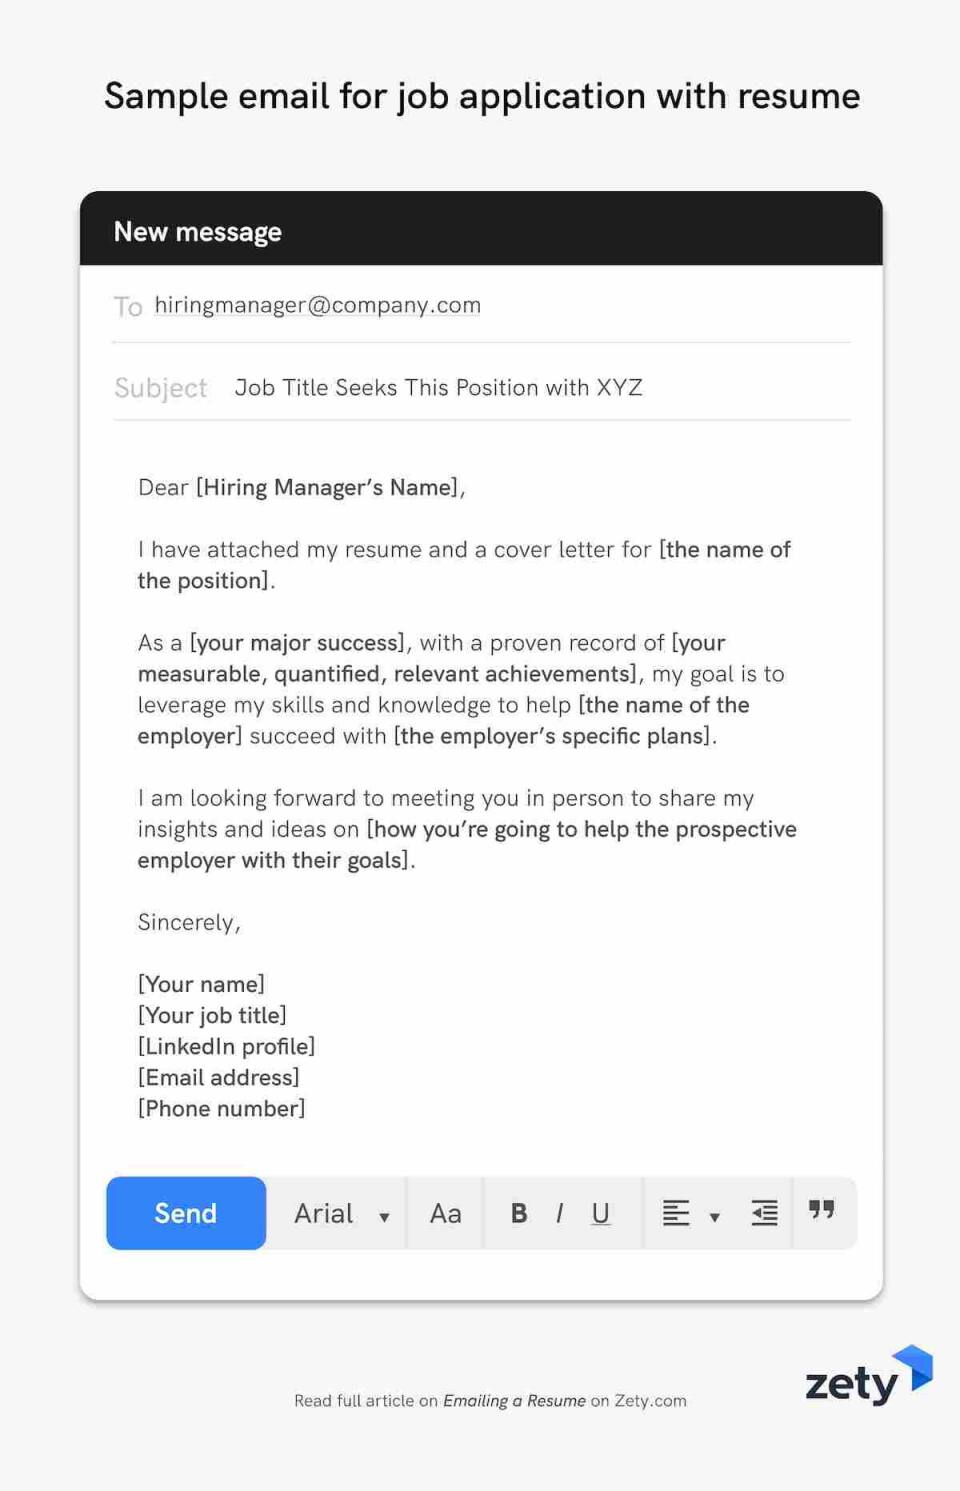 Email With Cover Letter And Resume Attached Sample from cdn-images.zety.com